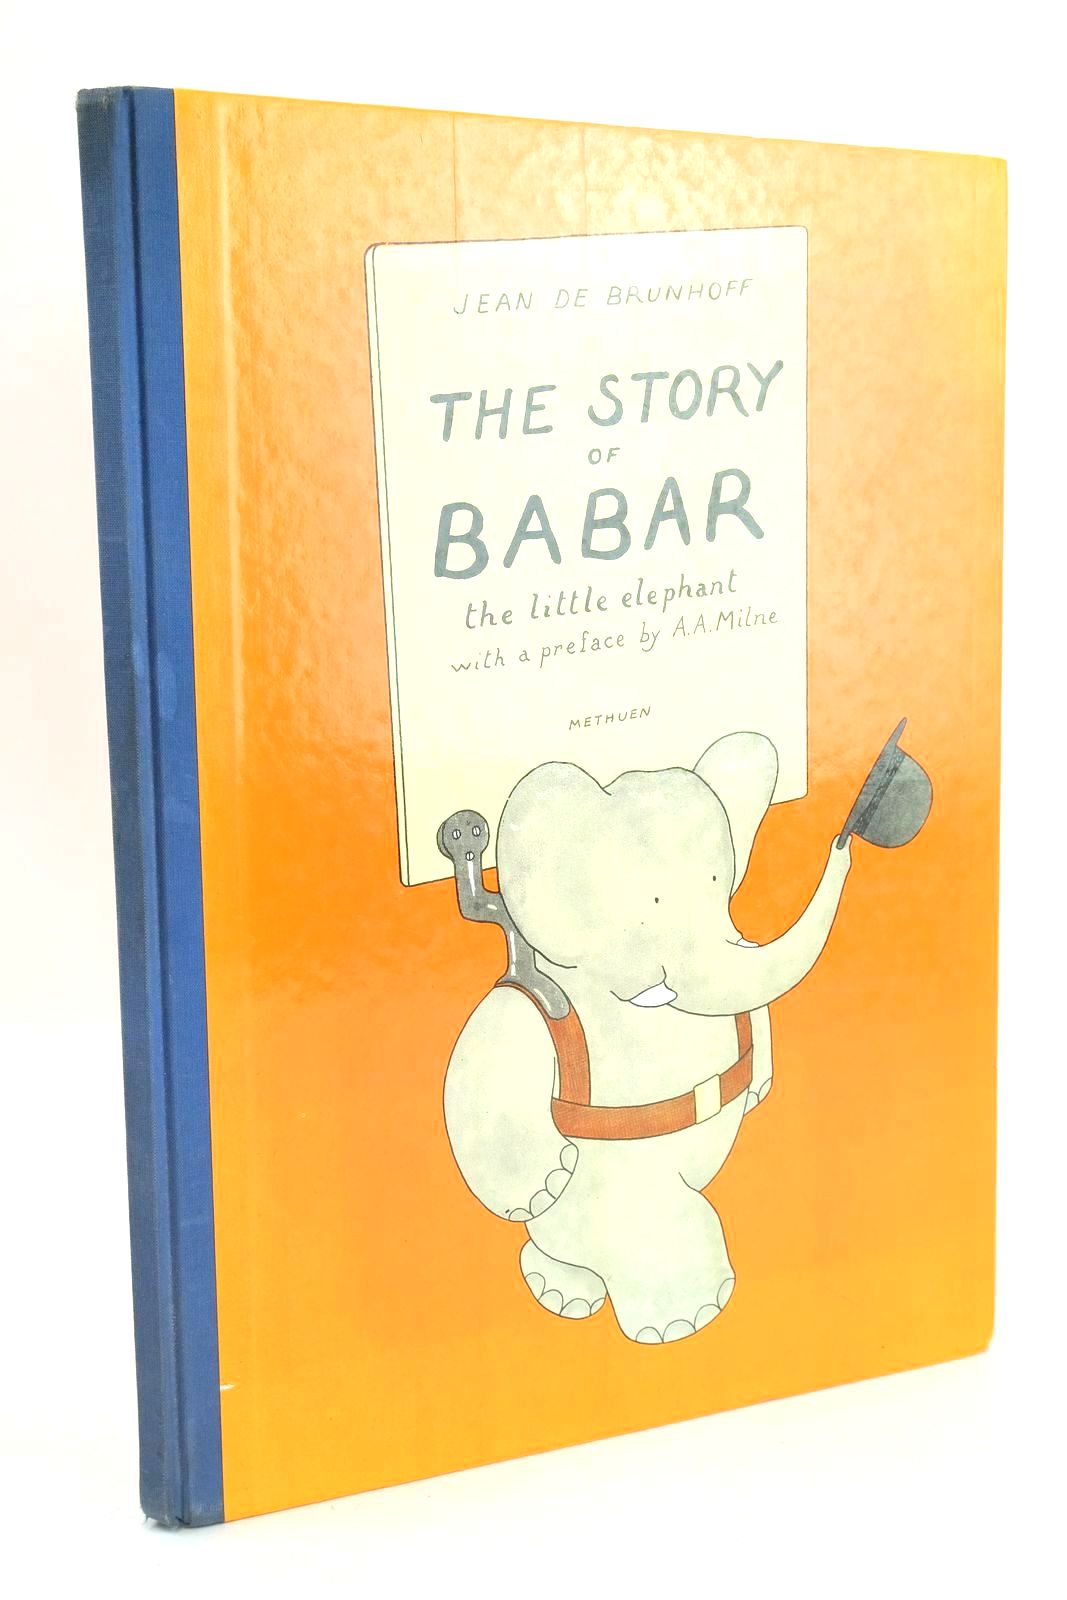 Photo of THE STORY OF BABAR THE LITTLE ELEPHANT written by De Brunhoff, Jean
Milne, A.A. illustrated by De Brunhoff, Jean published by Methuen Children's Books (STOCK CODE: 1325607)  for sale by Stella & Rose's Books